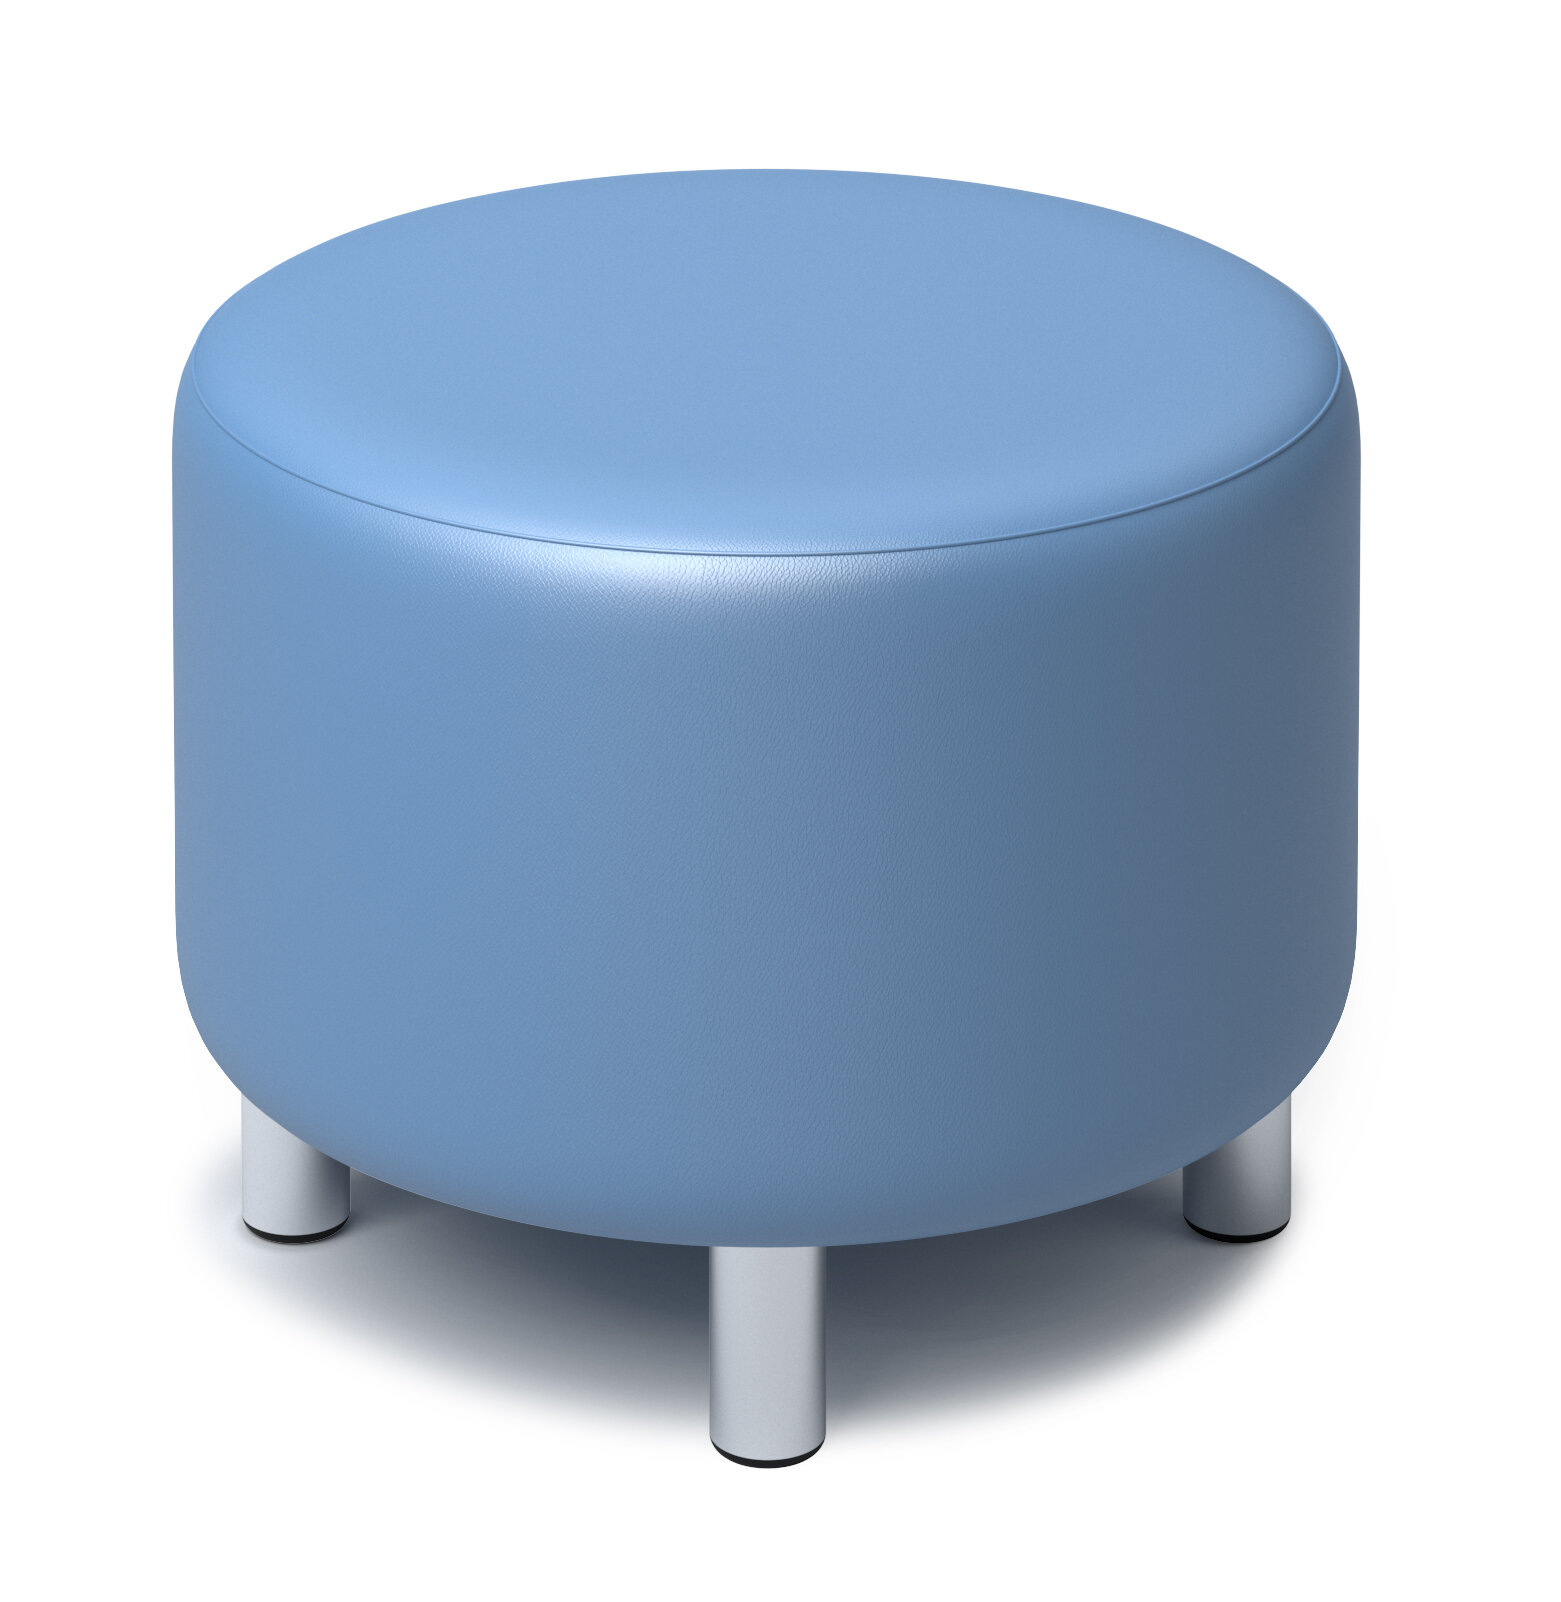 ROUND SOFT SEAT WITH LEGS